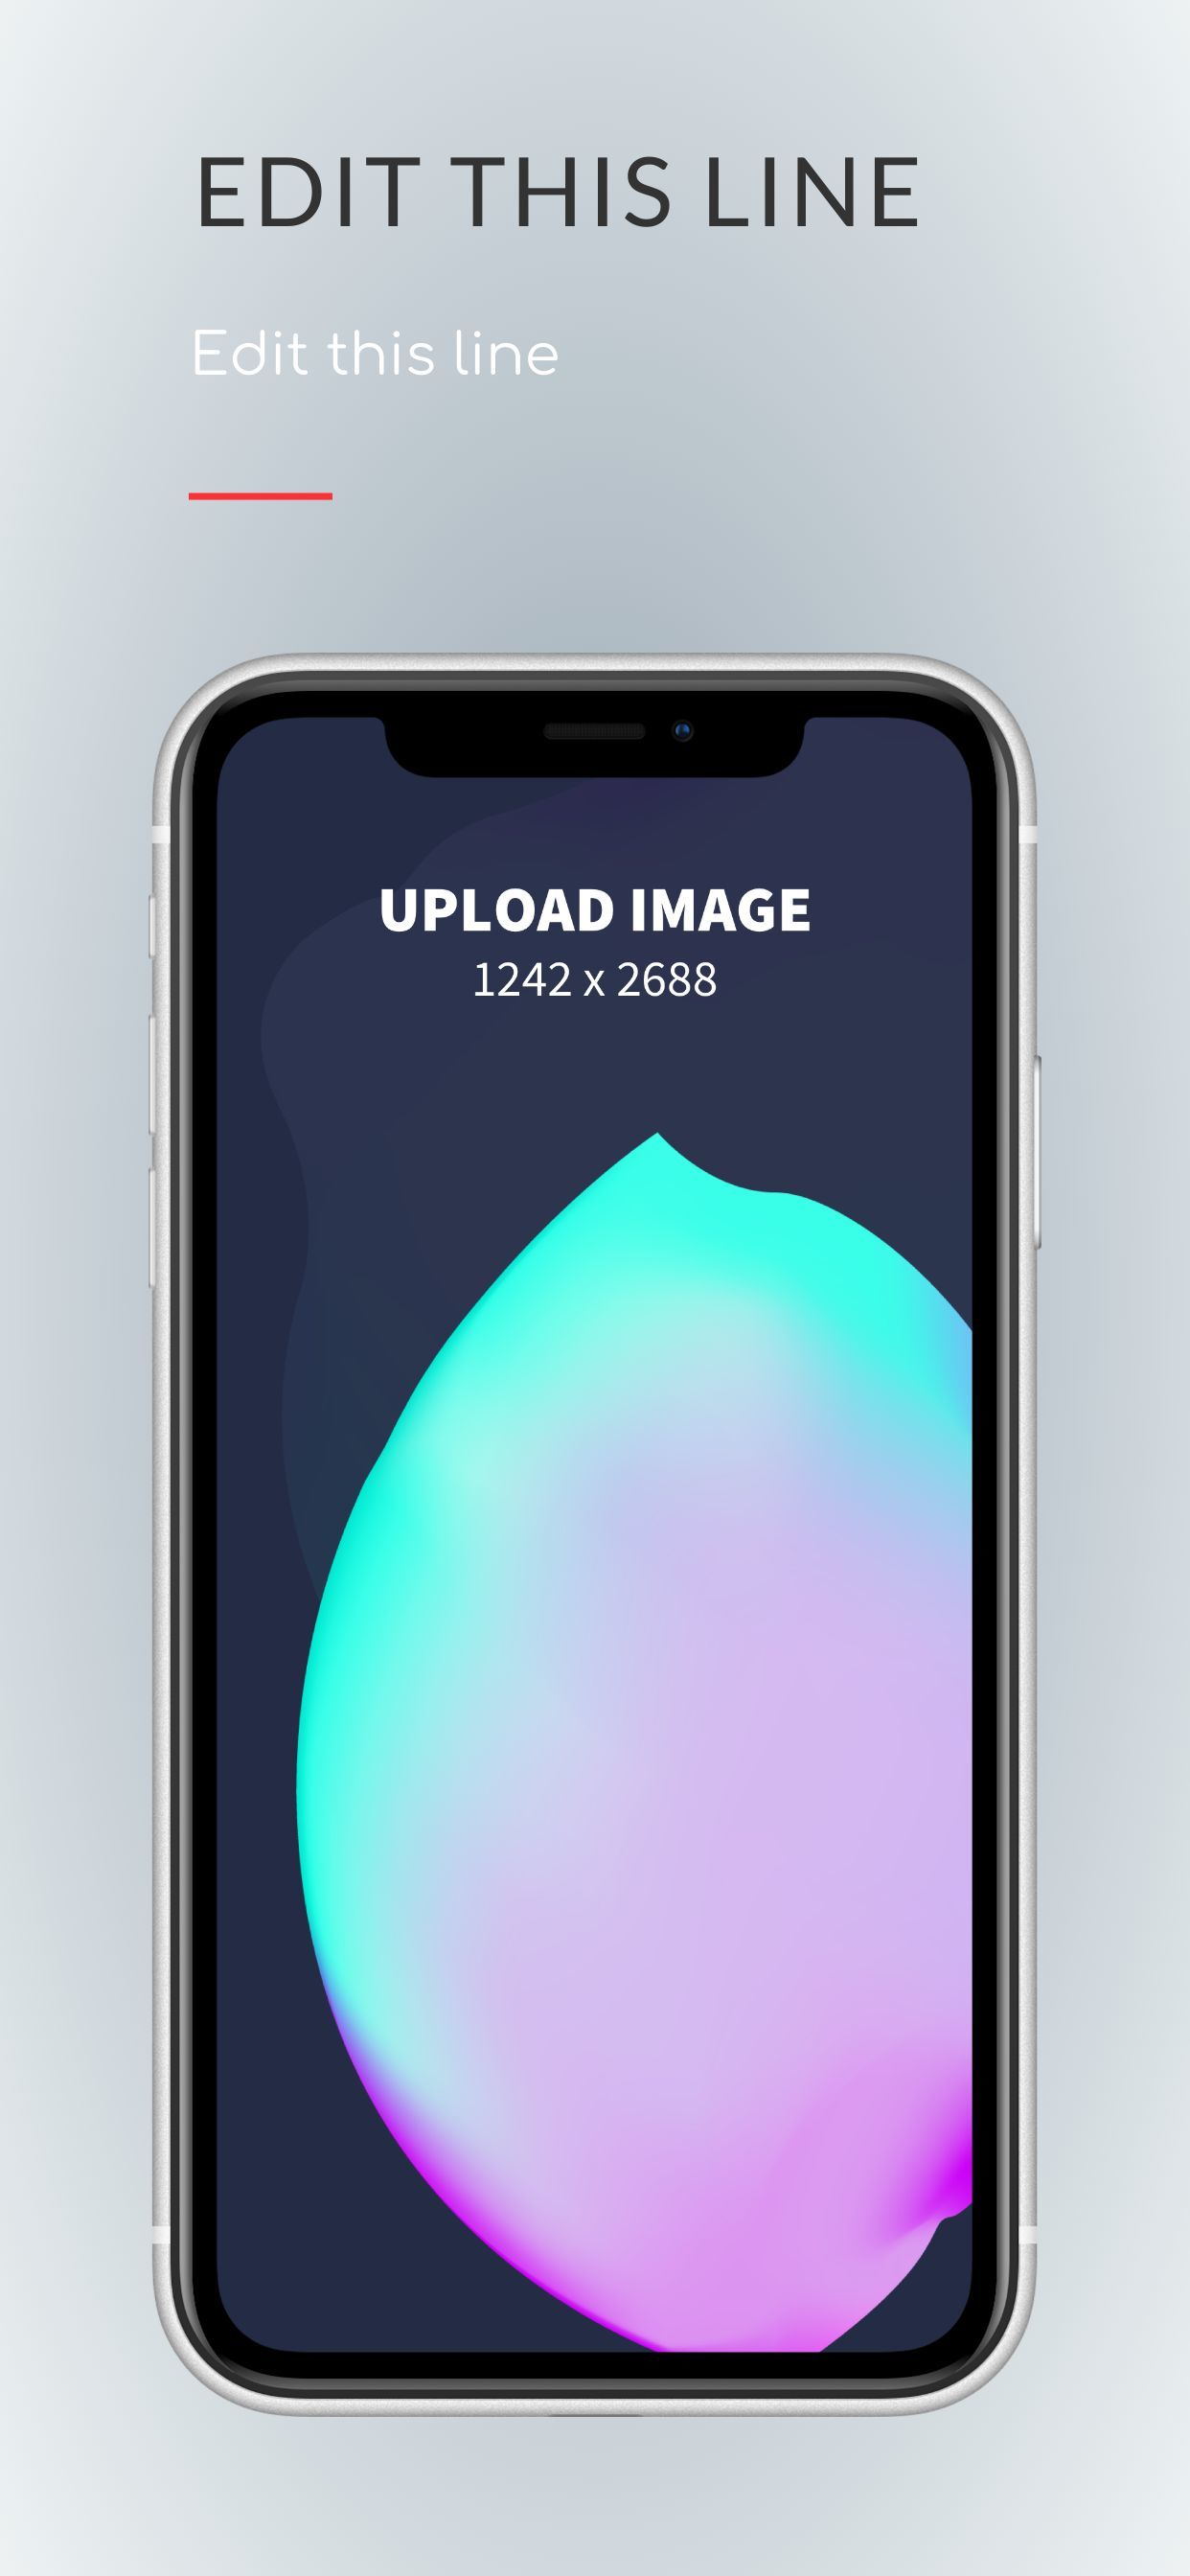 iPhone XS Max Screenshot 5 template. Quickly edit fonts, text, colors, and more for free.